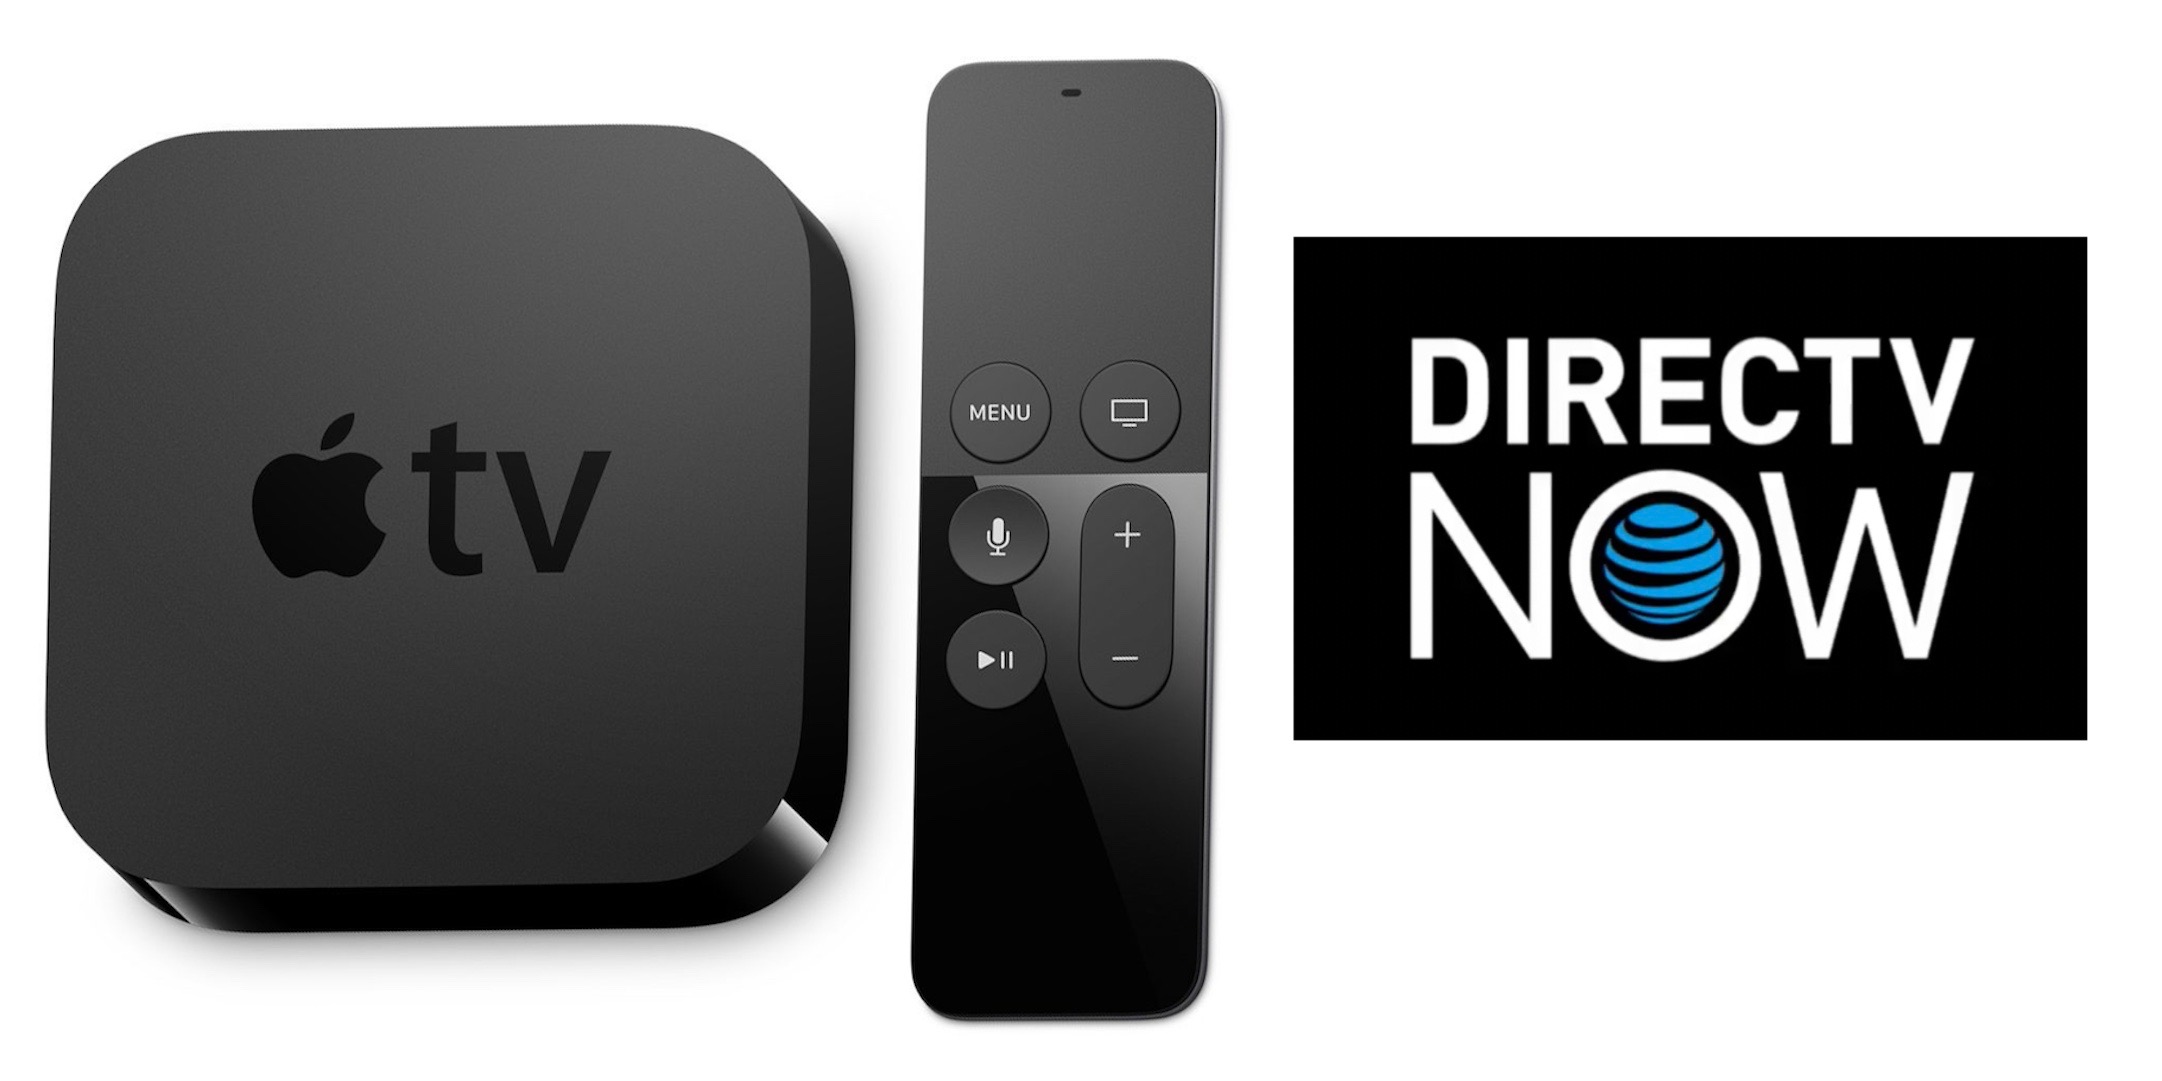 ATandTs DirecTV Now streaming TV service launching November 30 from $35/month + free Apple TV offer